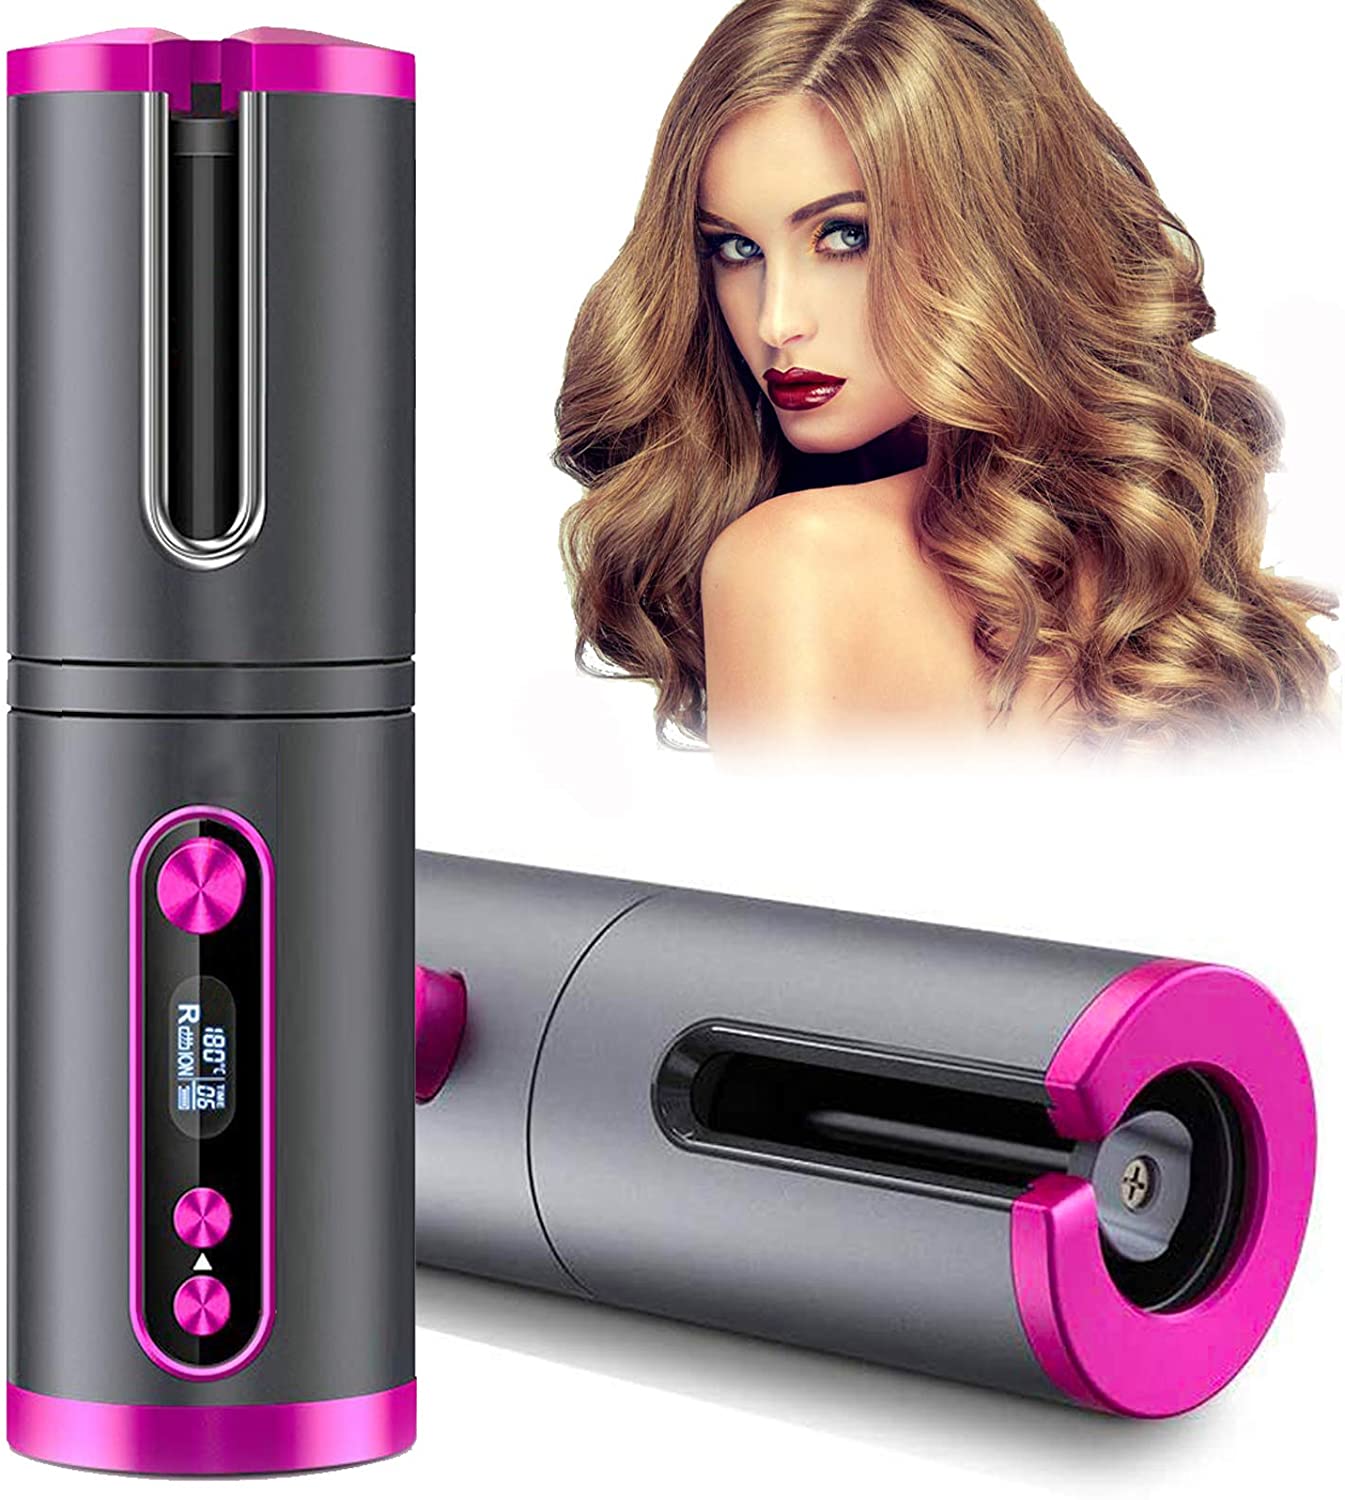 Cordless Hair Curler,Automatic Curling Iron,Auto Hair Curlers with LED Display Adjustable Temperature & Time,Portable Rechargeab